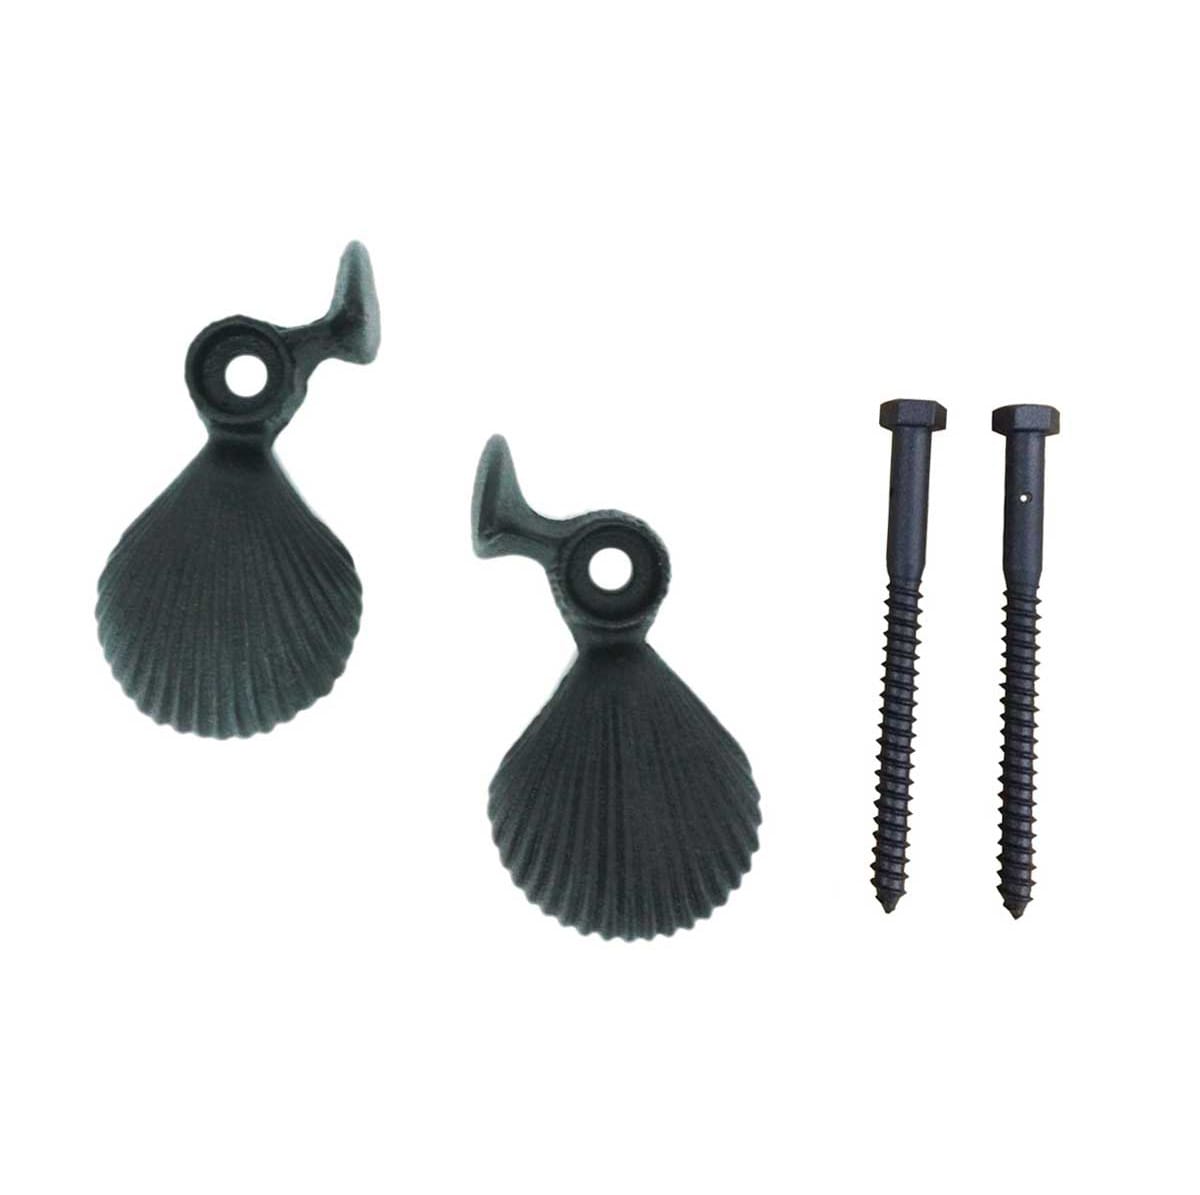 Shutter Dogs / Tiebacks - Shell with Lag - 5-1/4" Inch - Cast Iron - Black Powder Coat - Sold in Pairs